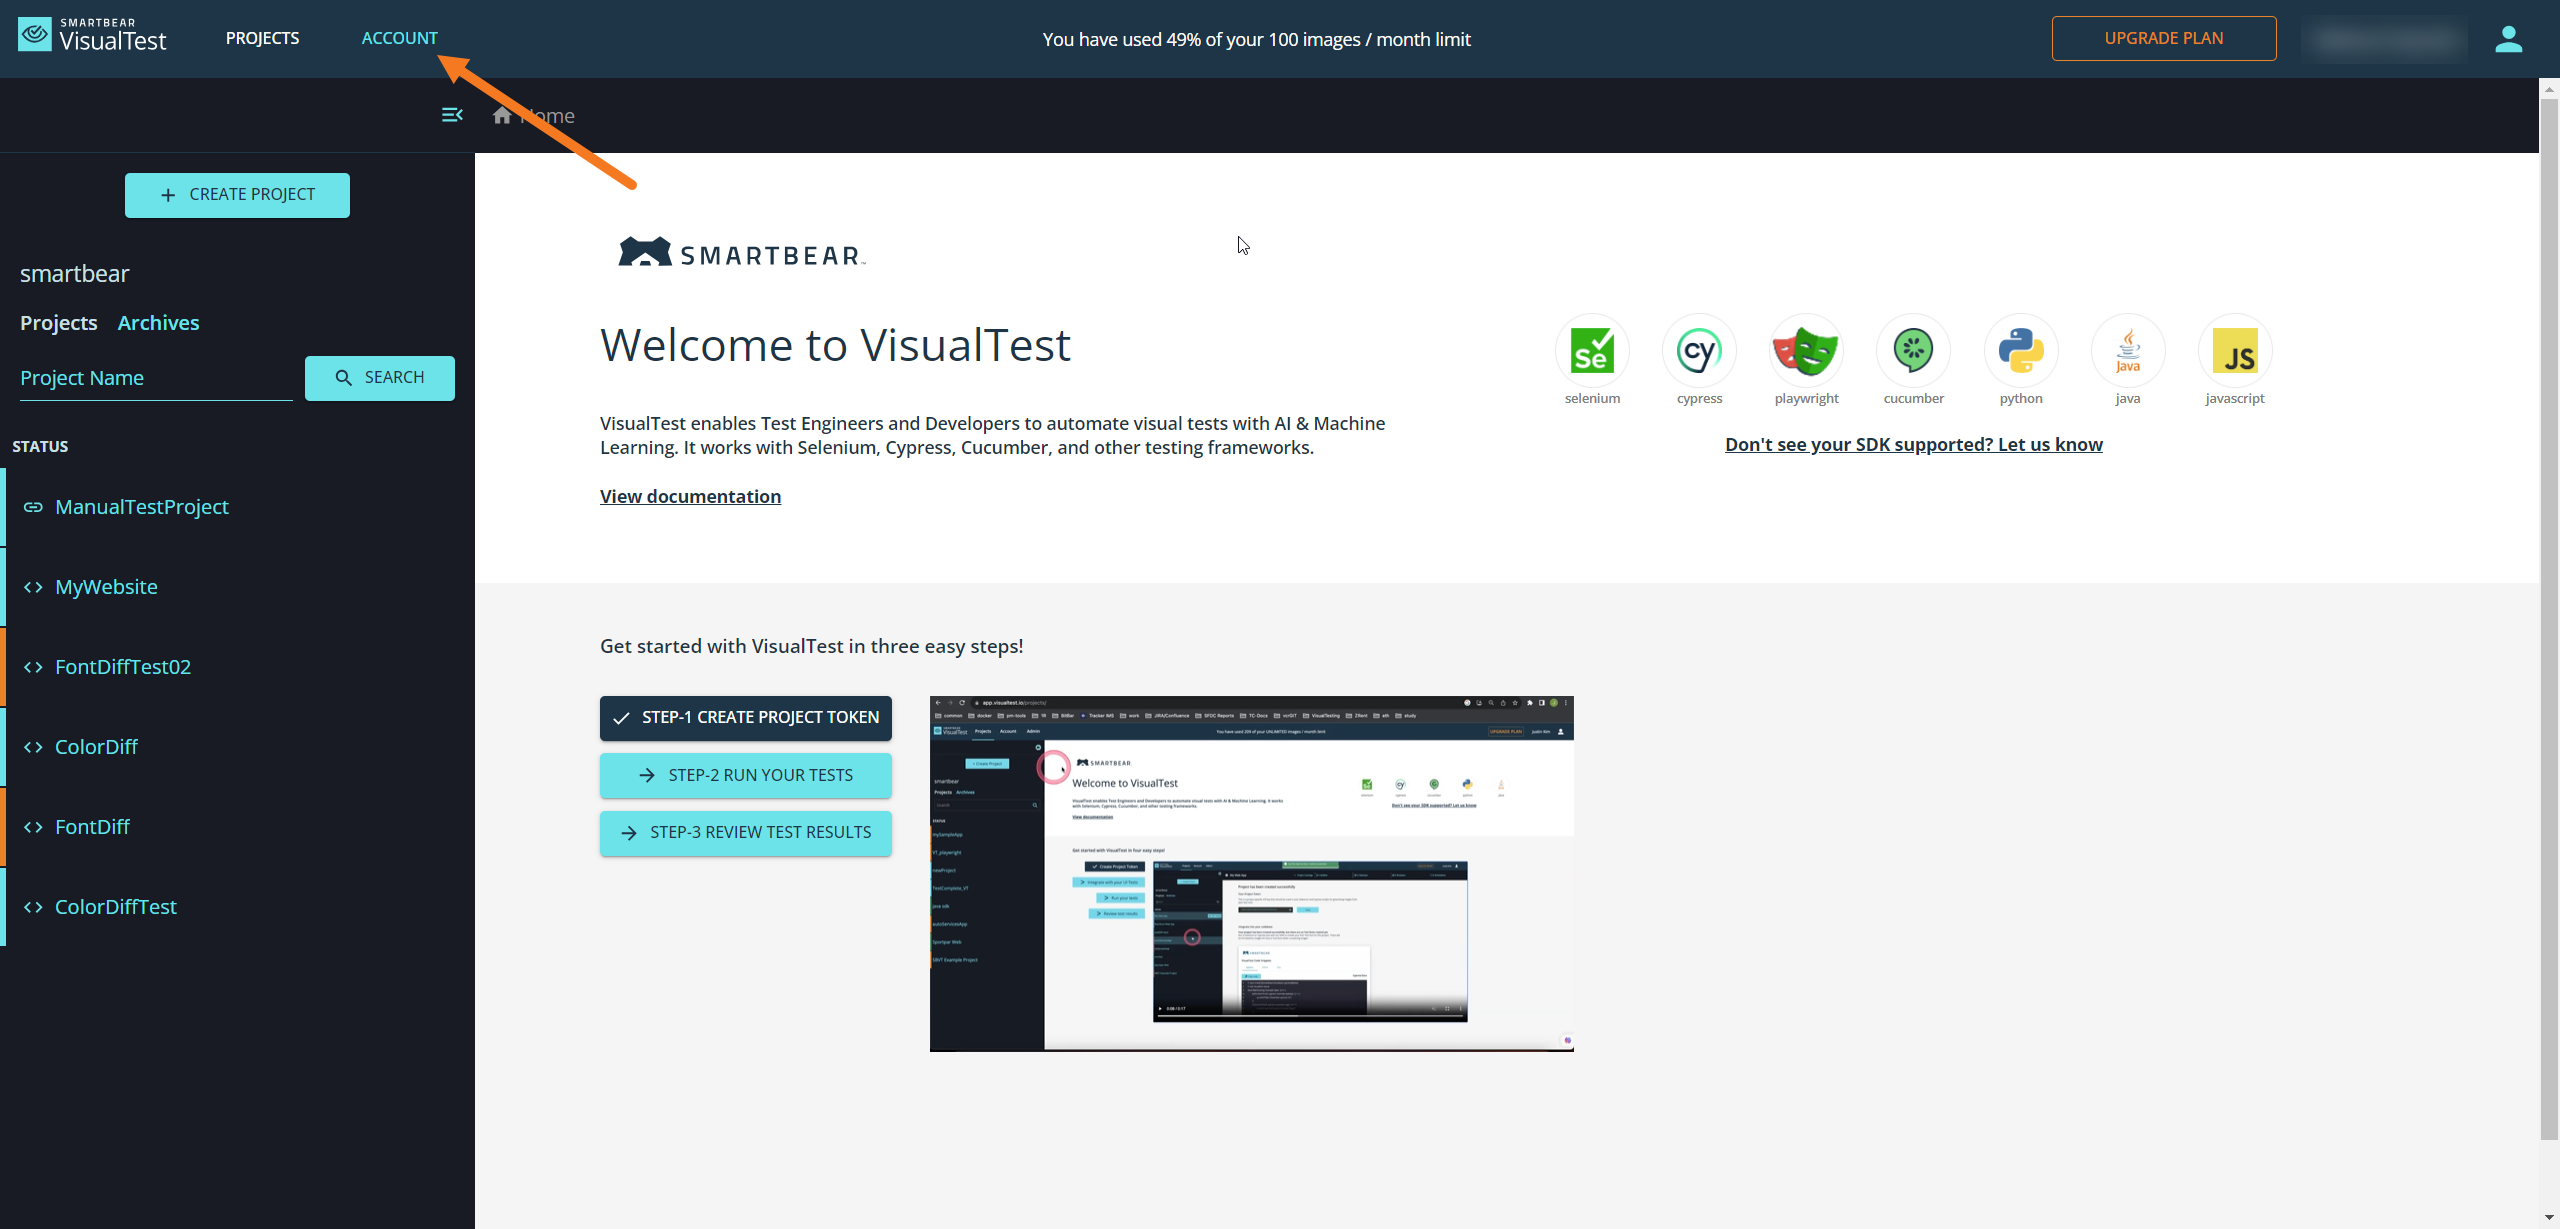 A screenshot of the VisualTest home page with the Account section indicated.